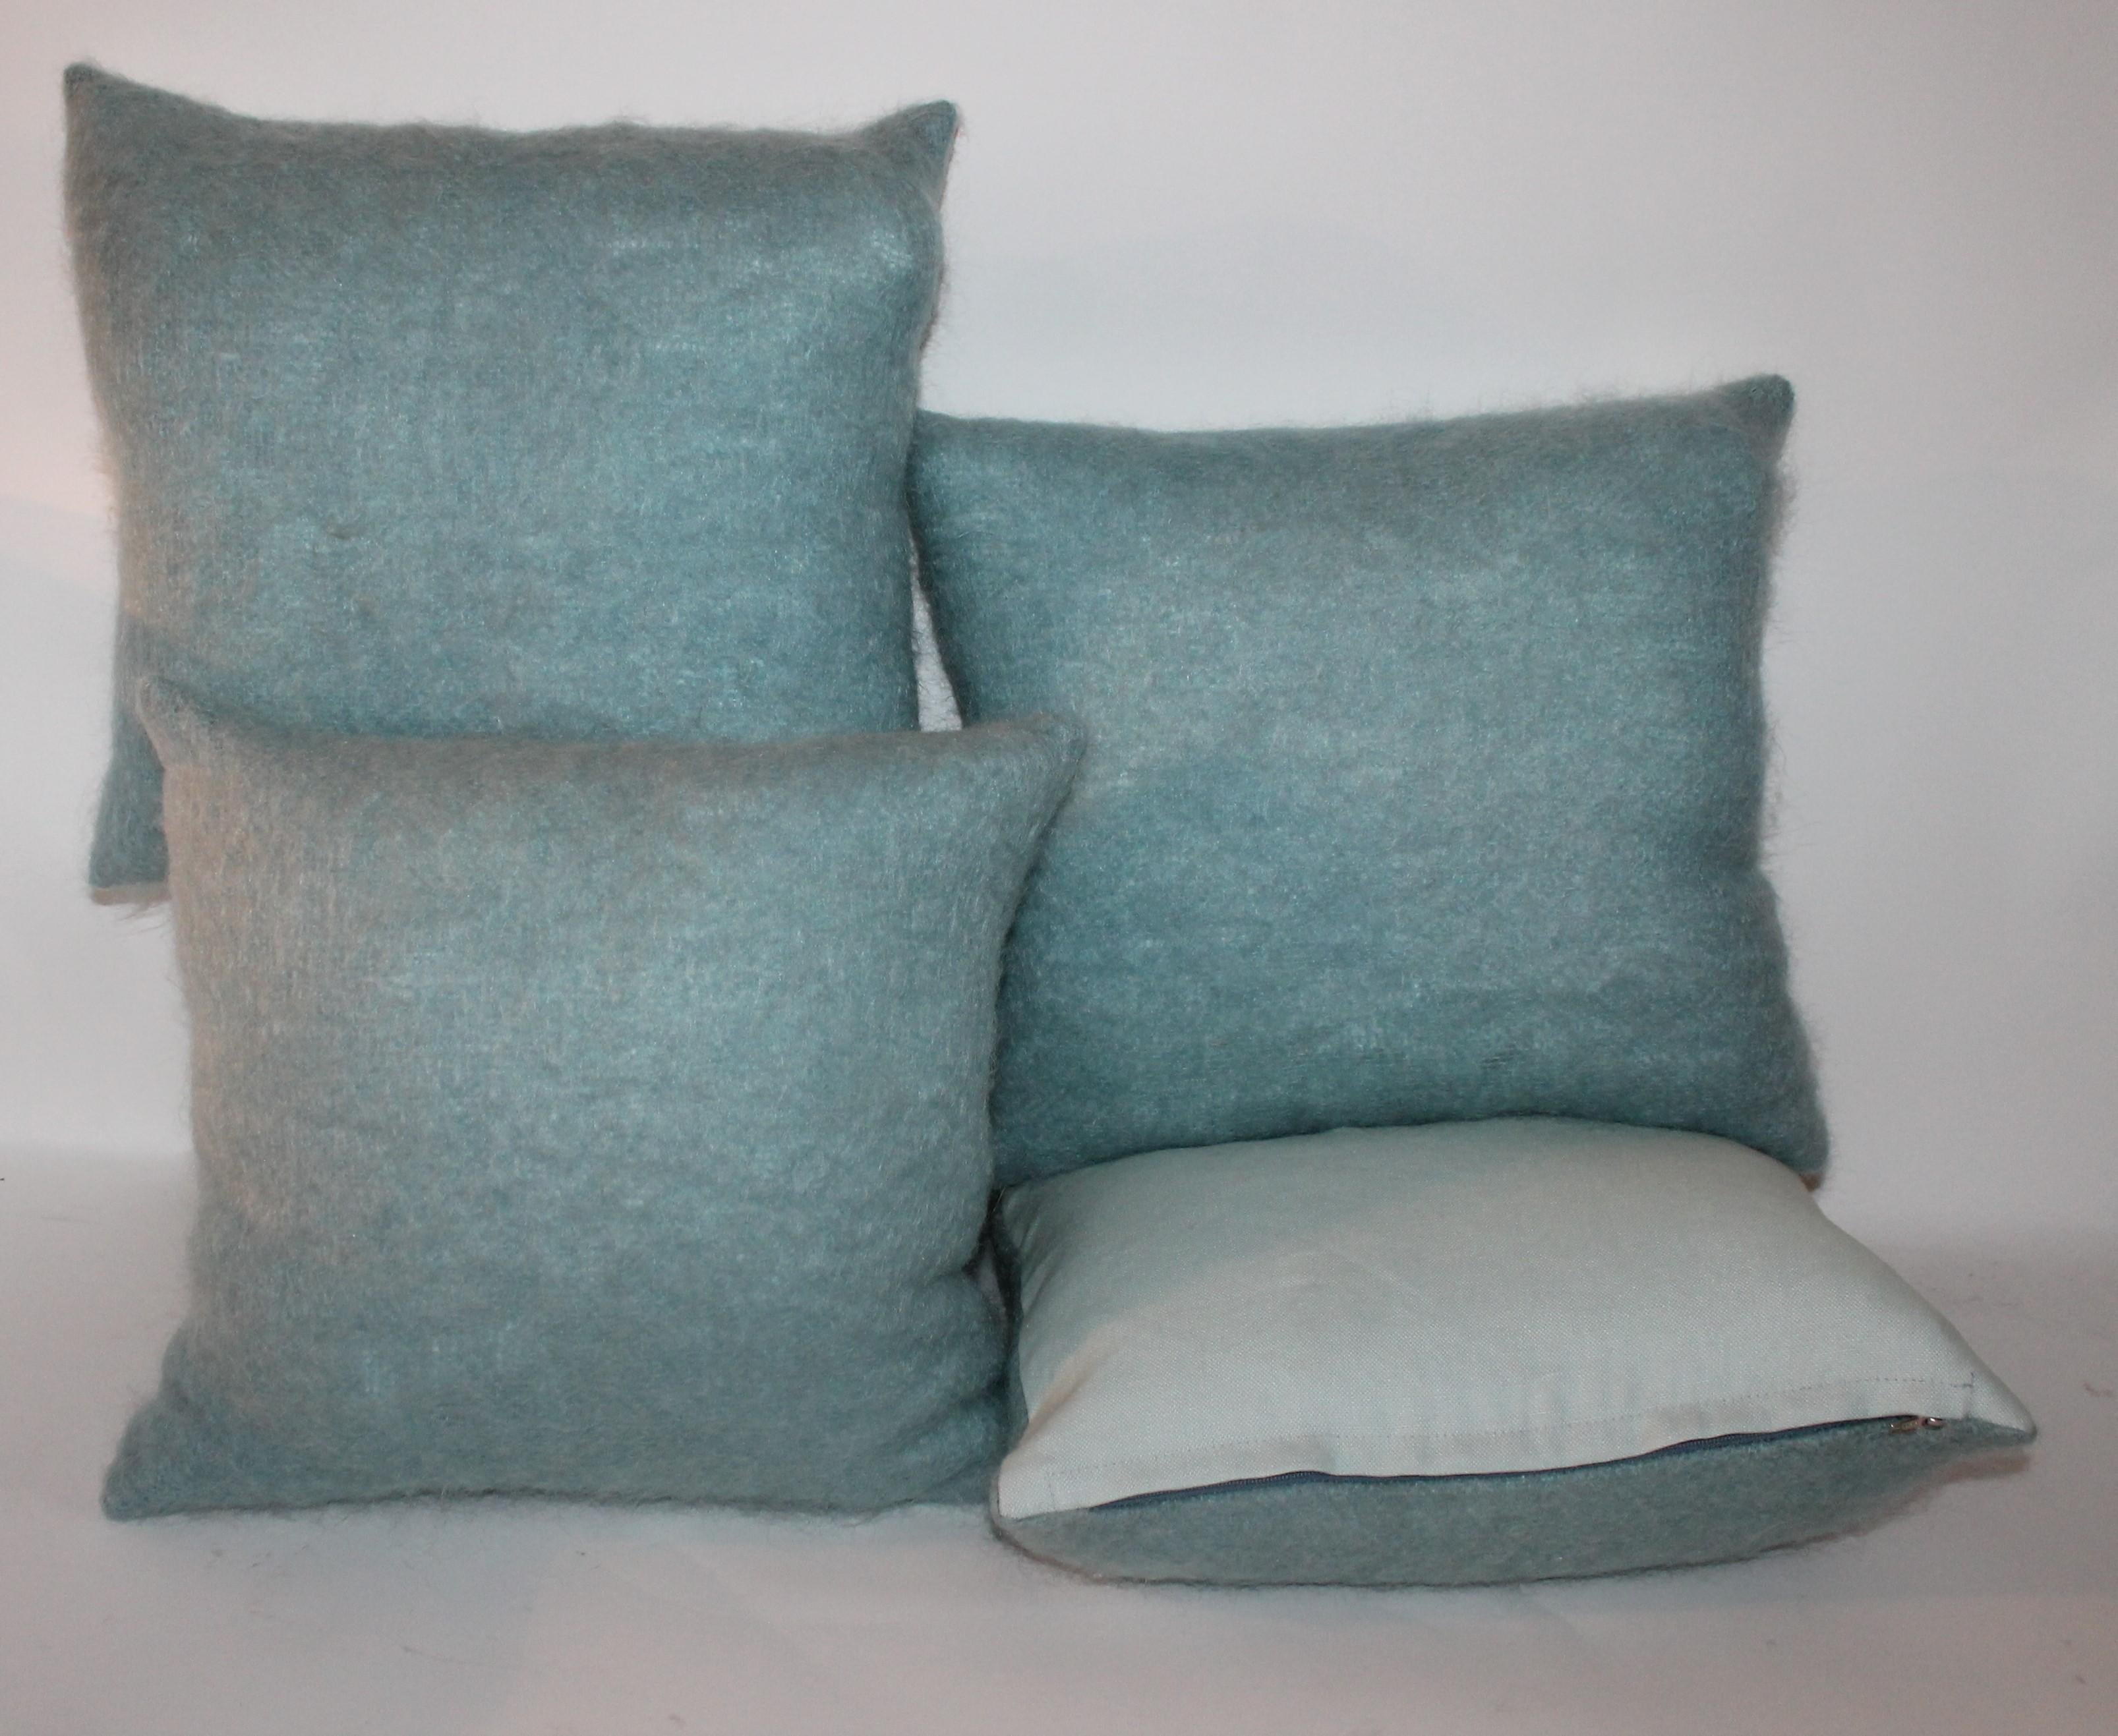 These fine robin egg blue mohair pillows have light blue cotton linen backings. The inserts are down and feather fill. Sold as collection of four.